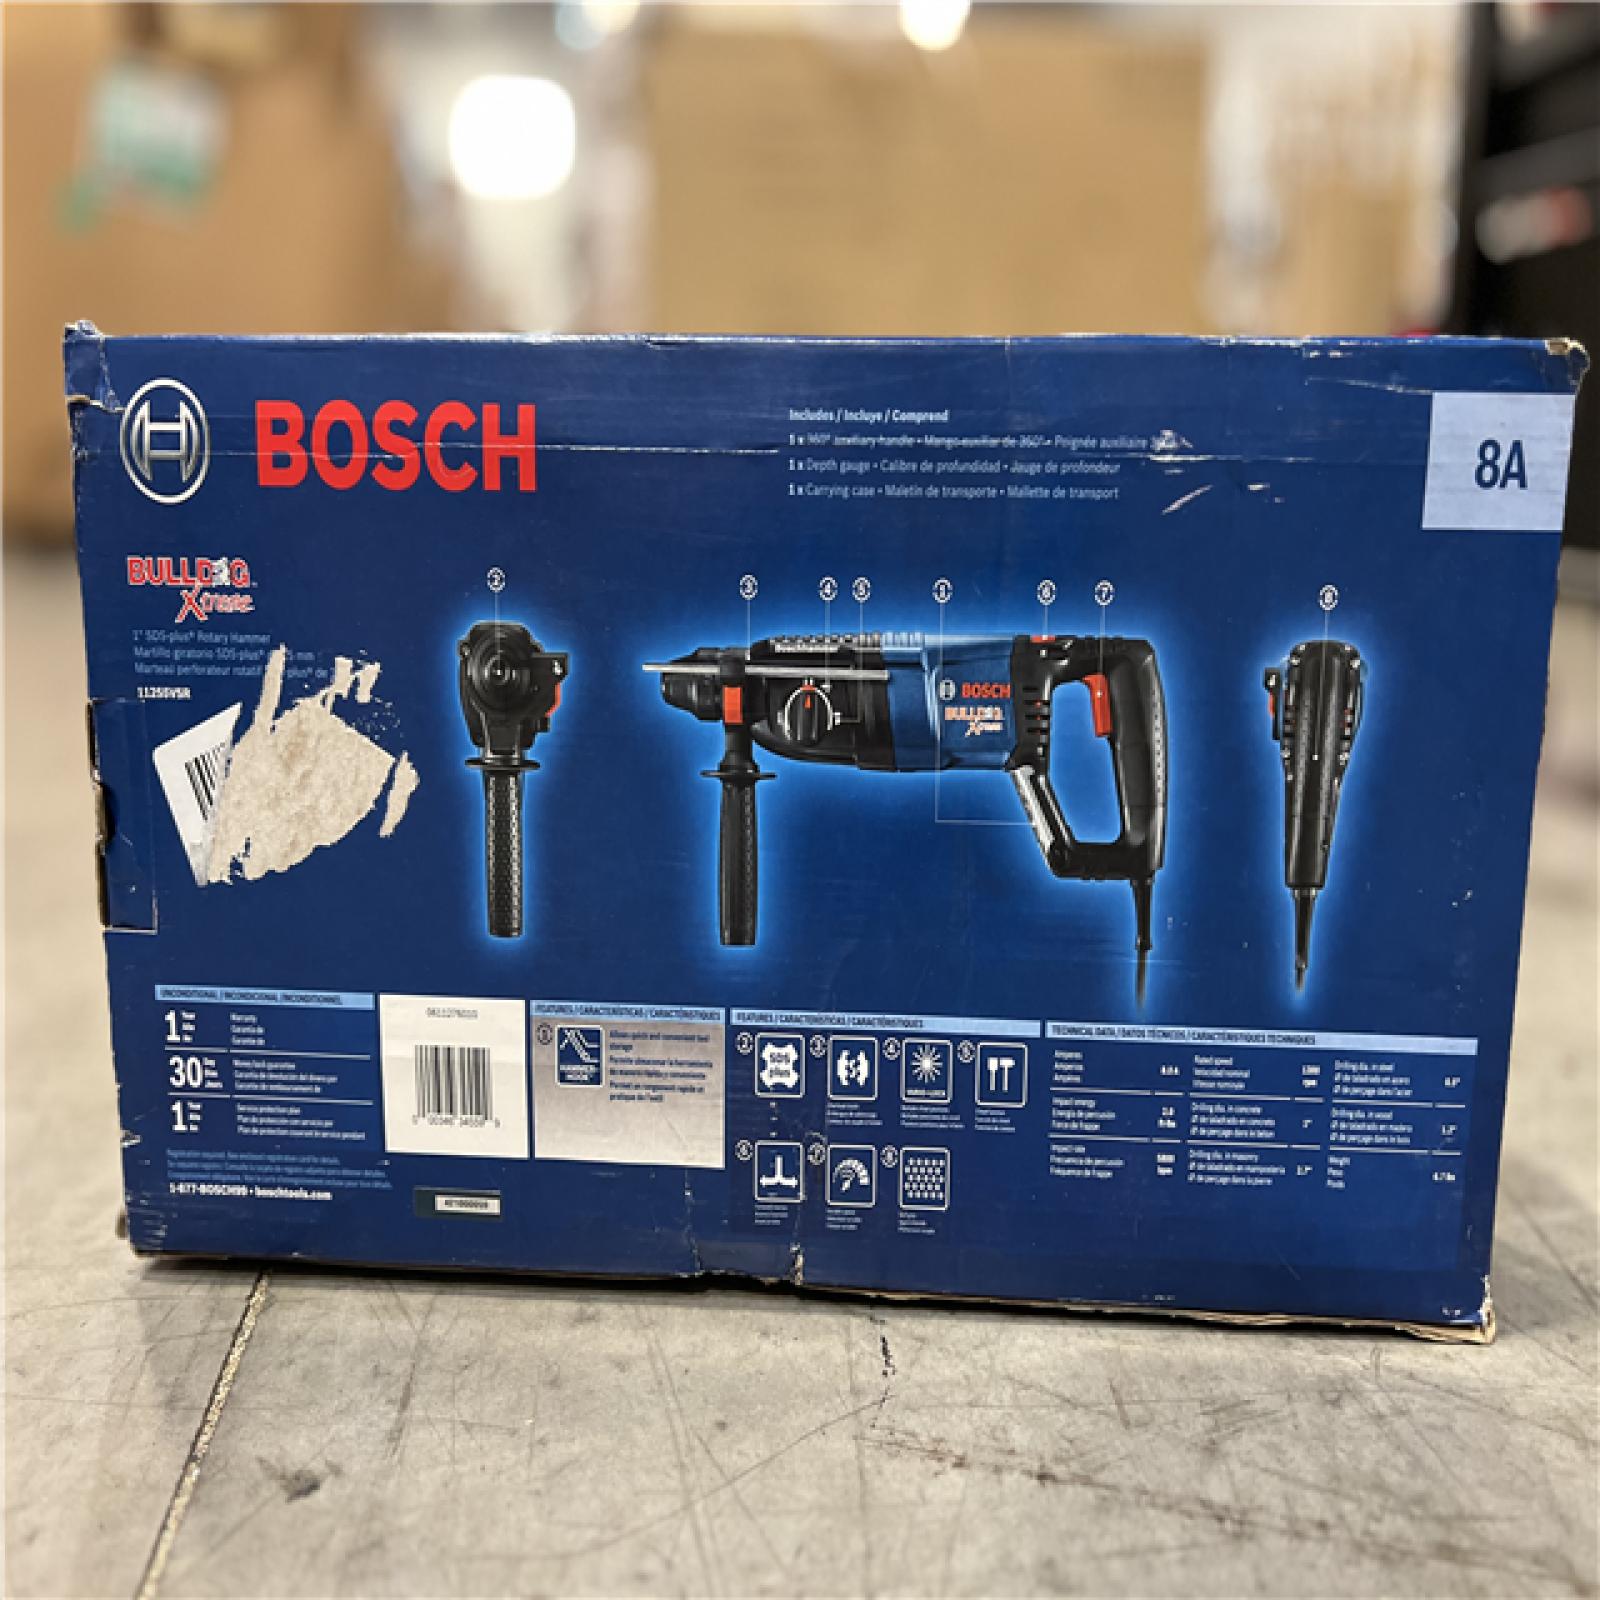 NEW! - Bosch Bulldog Xtreme 8 Amp 1 in. Corded Variable Speed SDS-Plus Concrete/Masonry Rotary Hammer Drill with Carrying Case